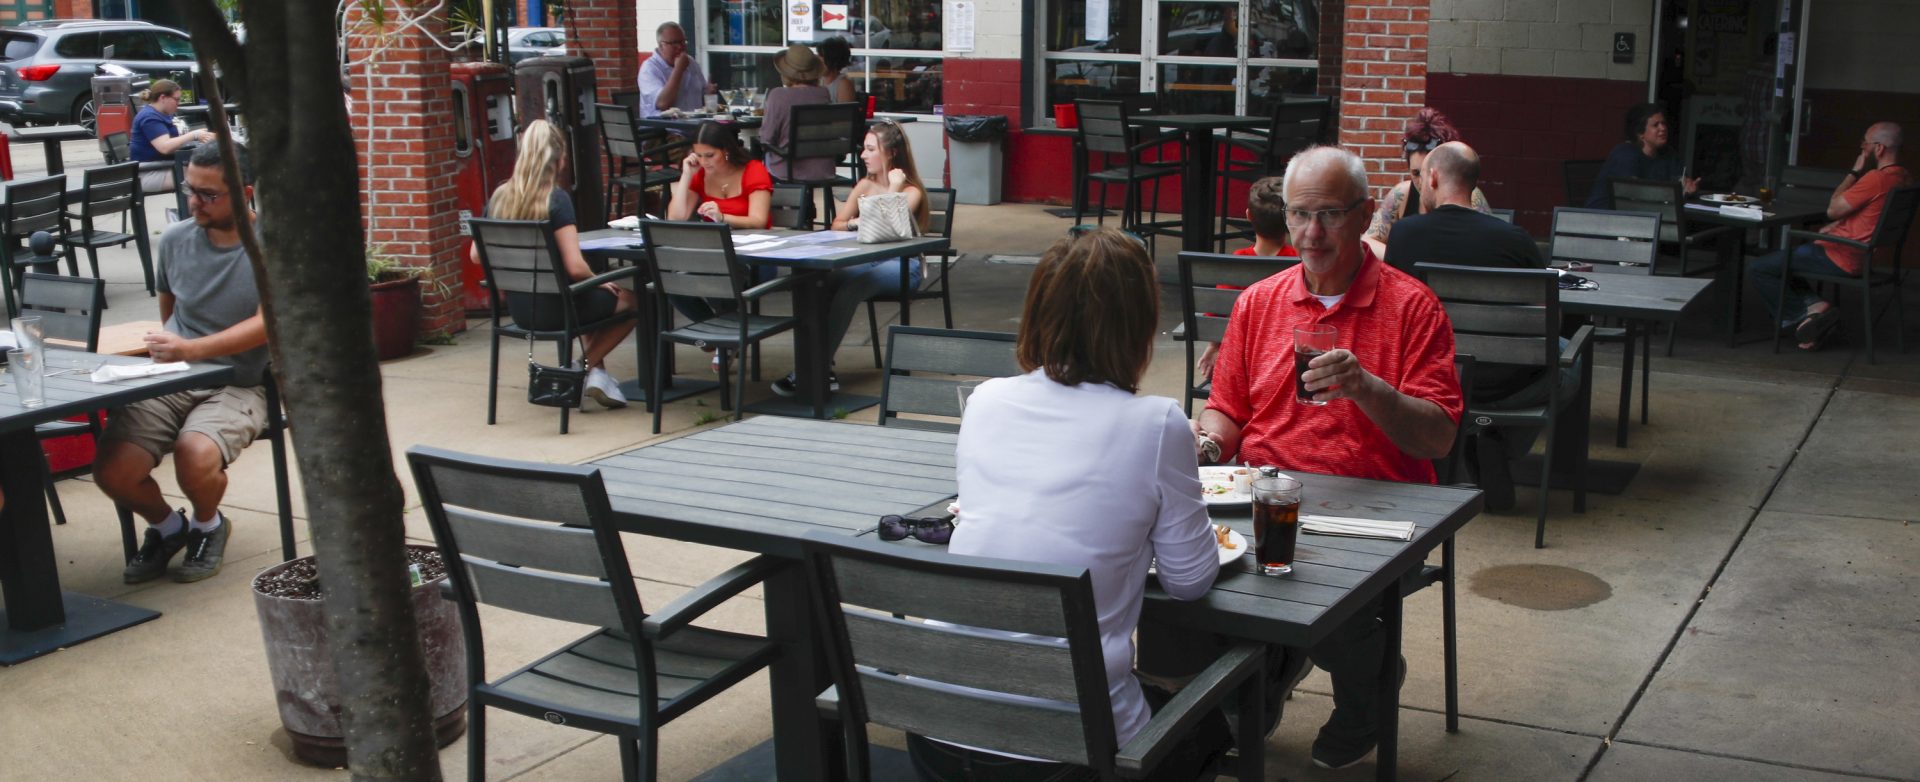 People take advantage of newly lowered COVID-19 protective restrictions in most of southwest Pennsylvania and have lunch outside on the re-opening day for seated patrons at a diner on Pittsburgh's Southside, Friday, June 5, 2020.